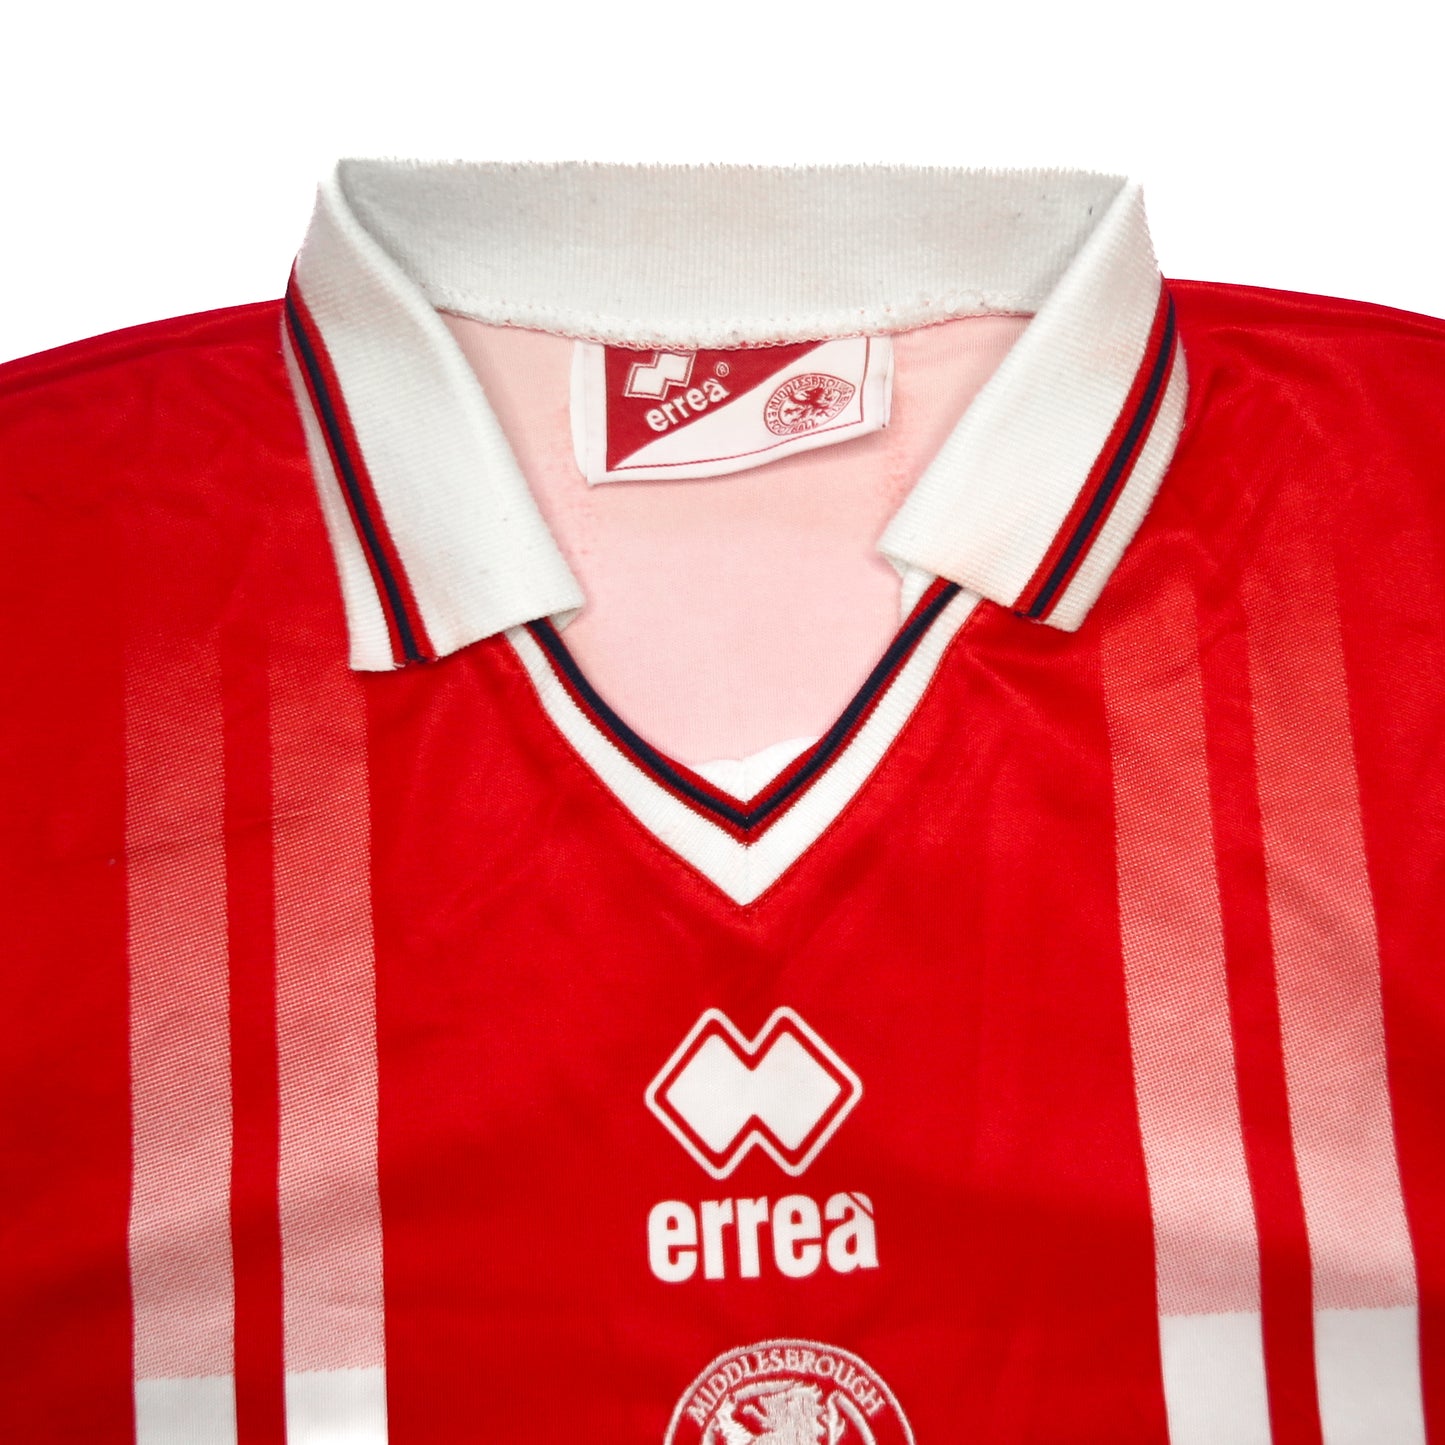 Middlesbrough 1998/99 Errea Home (XS/S)